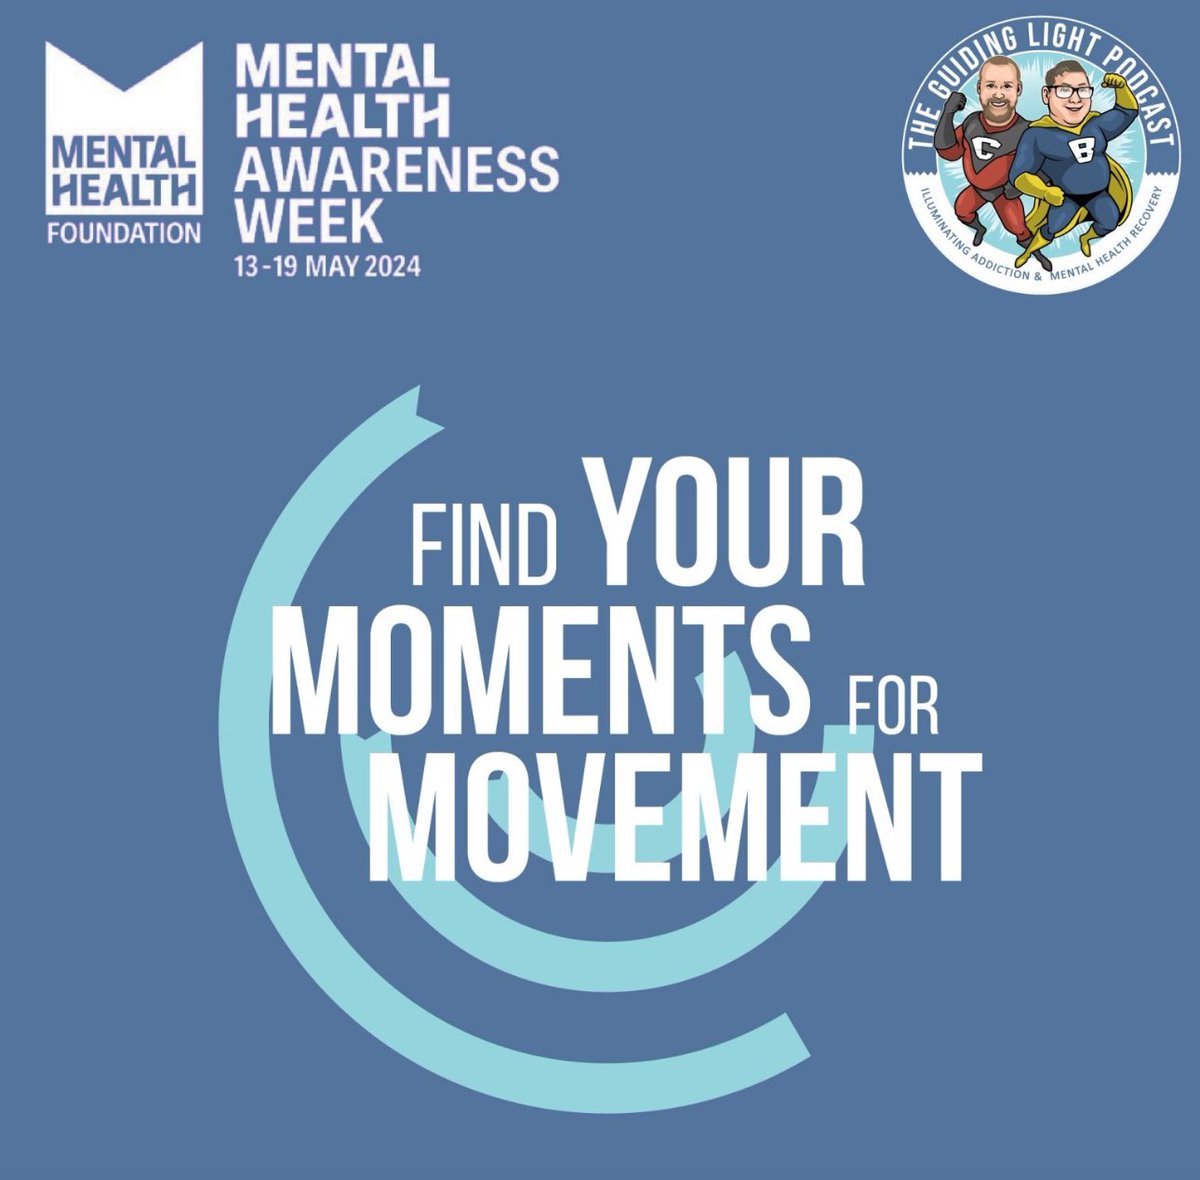 This Mental Health Awareness Week, let's prioritise movement for mental well-being! Find a movement you love, whether it's yoga, dancing, or walking, and make it a part of your self-care routine. Let's support each other in staying active for our minds and bodies.